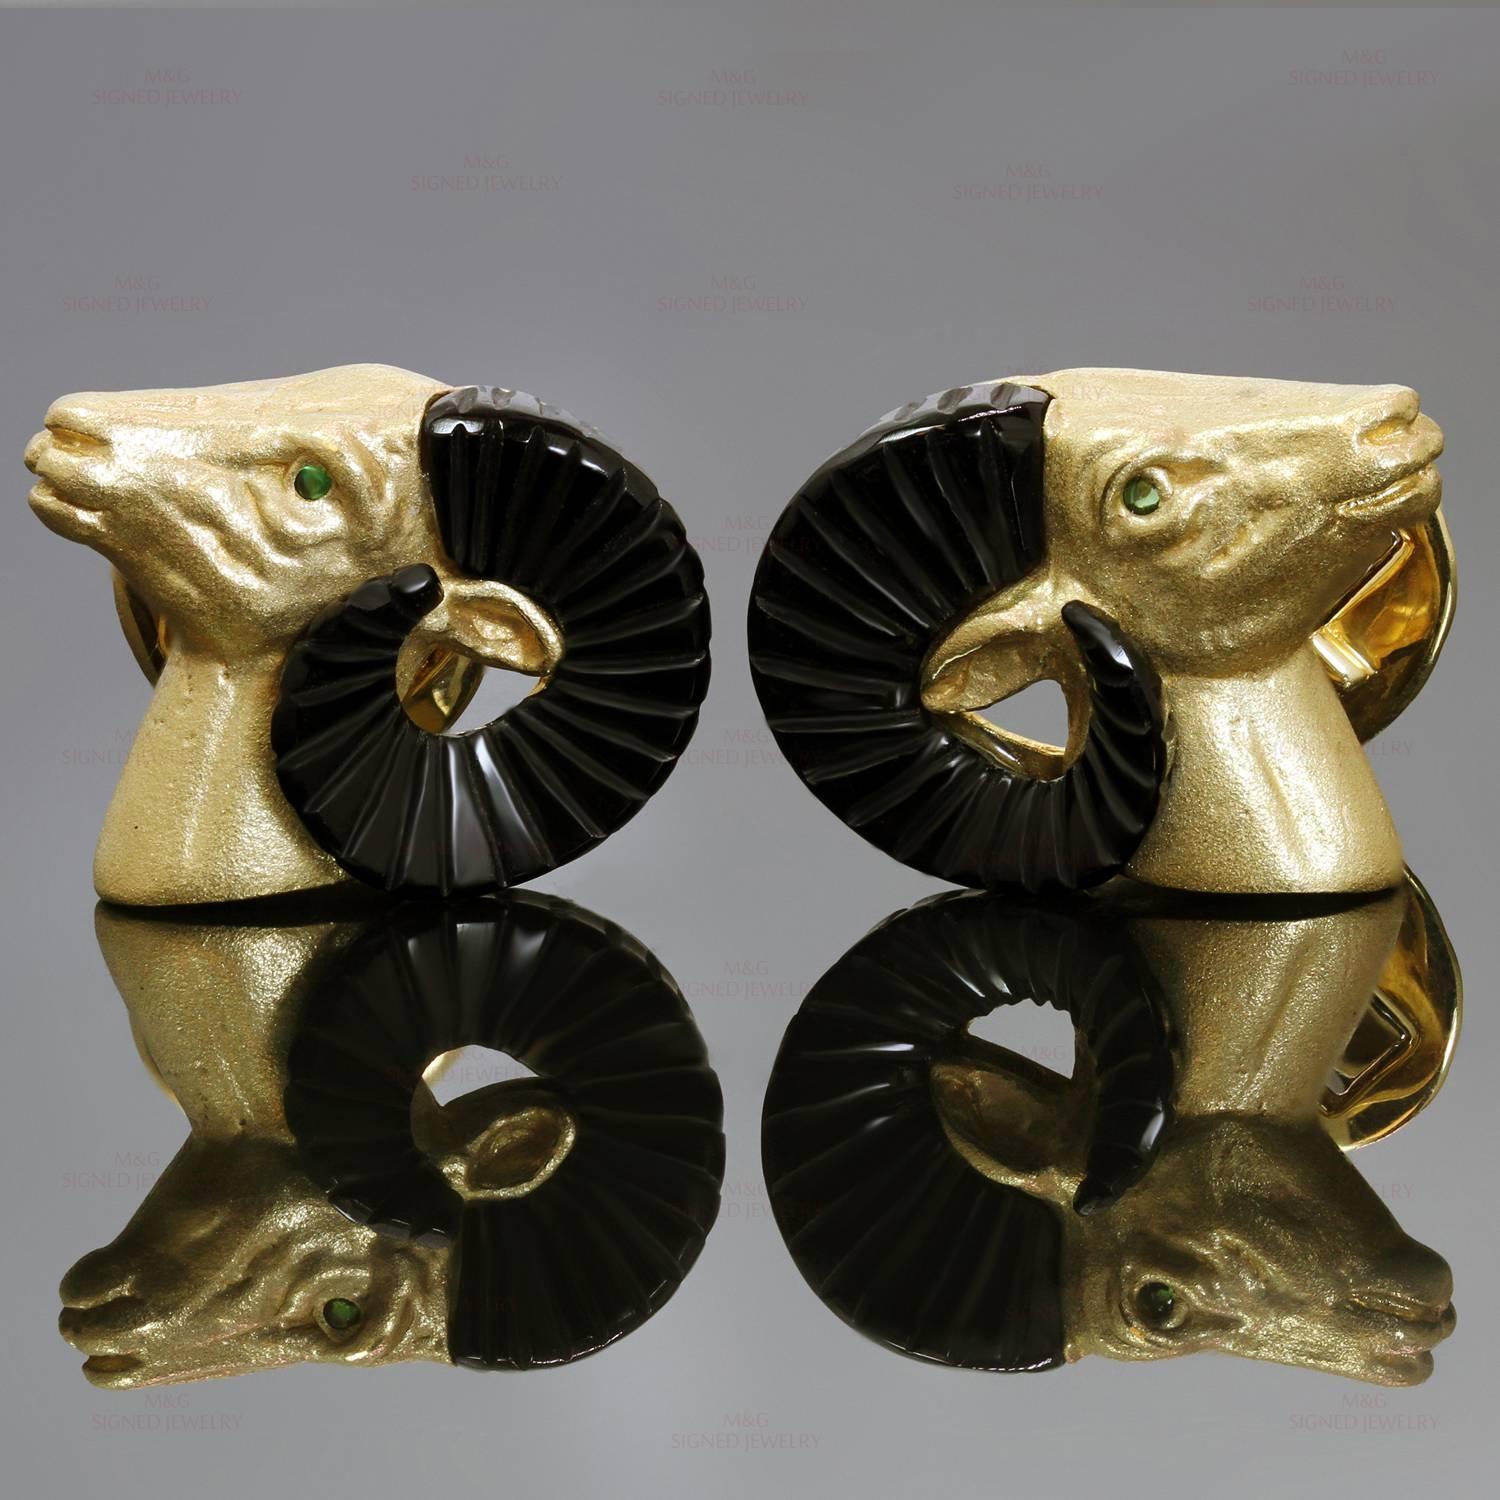 These stunning Safari cufflinks feature a rams head design crafted in 18k yellow gold and accented with cabochon emerald eyes and black onyx horns. Made in United Kingdon circa 1990s. Measurements: 0.90